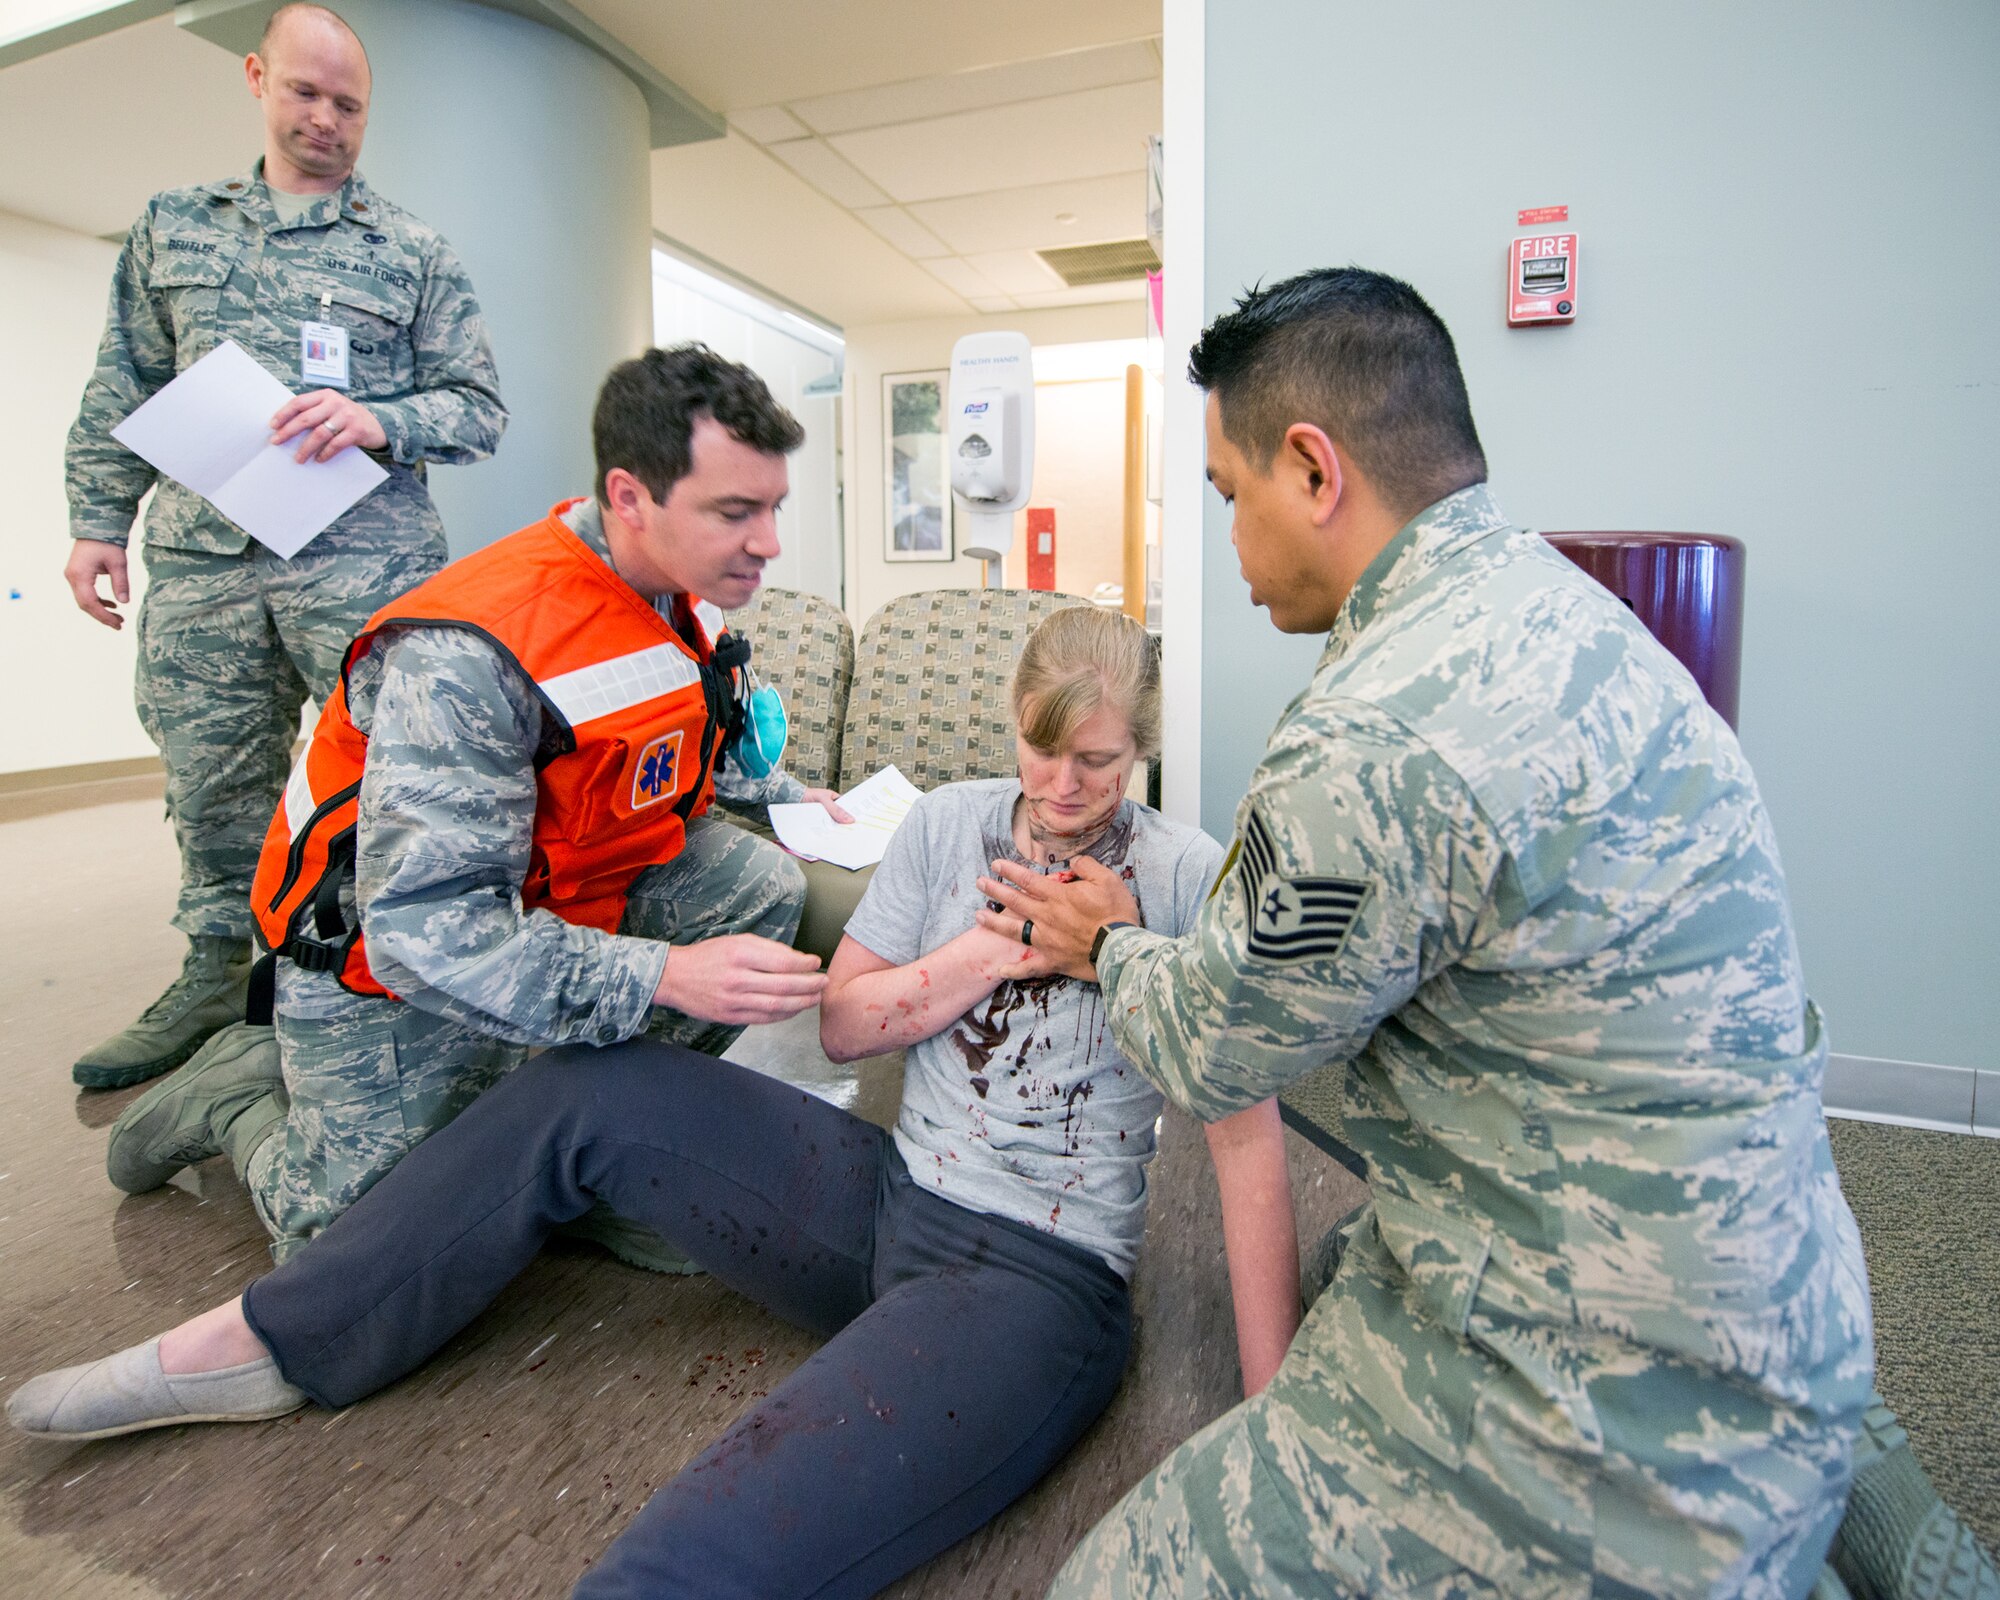 Service members from David Grant USAF Medical Center participate in an active shooter exercise at Travis Air Force Base, Calif., Jan. 26, 2017. The exercise evaluated the medical staff’s lock down response and patient care procedures. (U.S. Air Force photo/Louis Briscese)